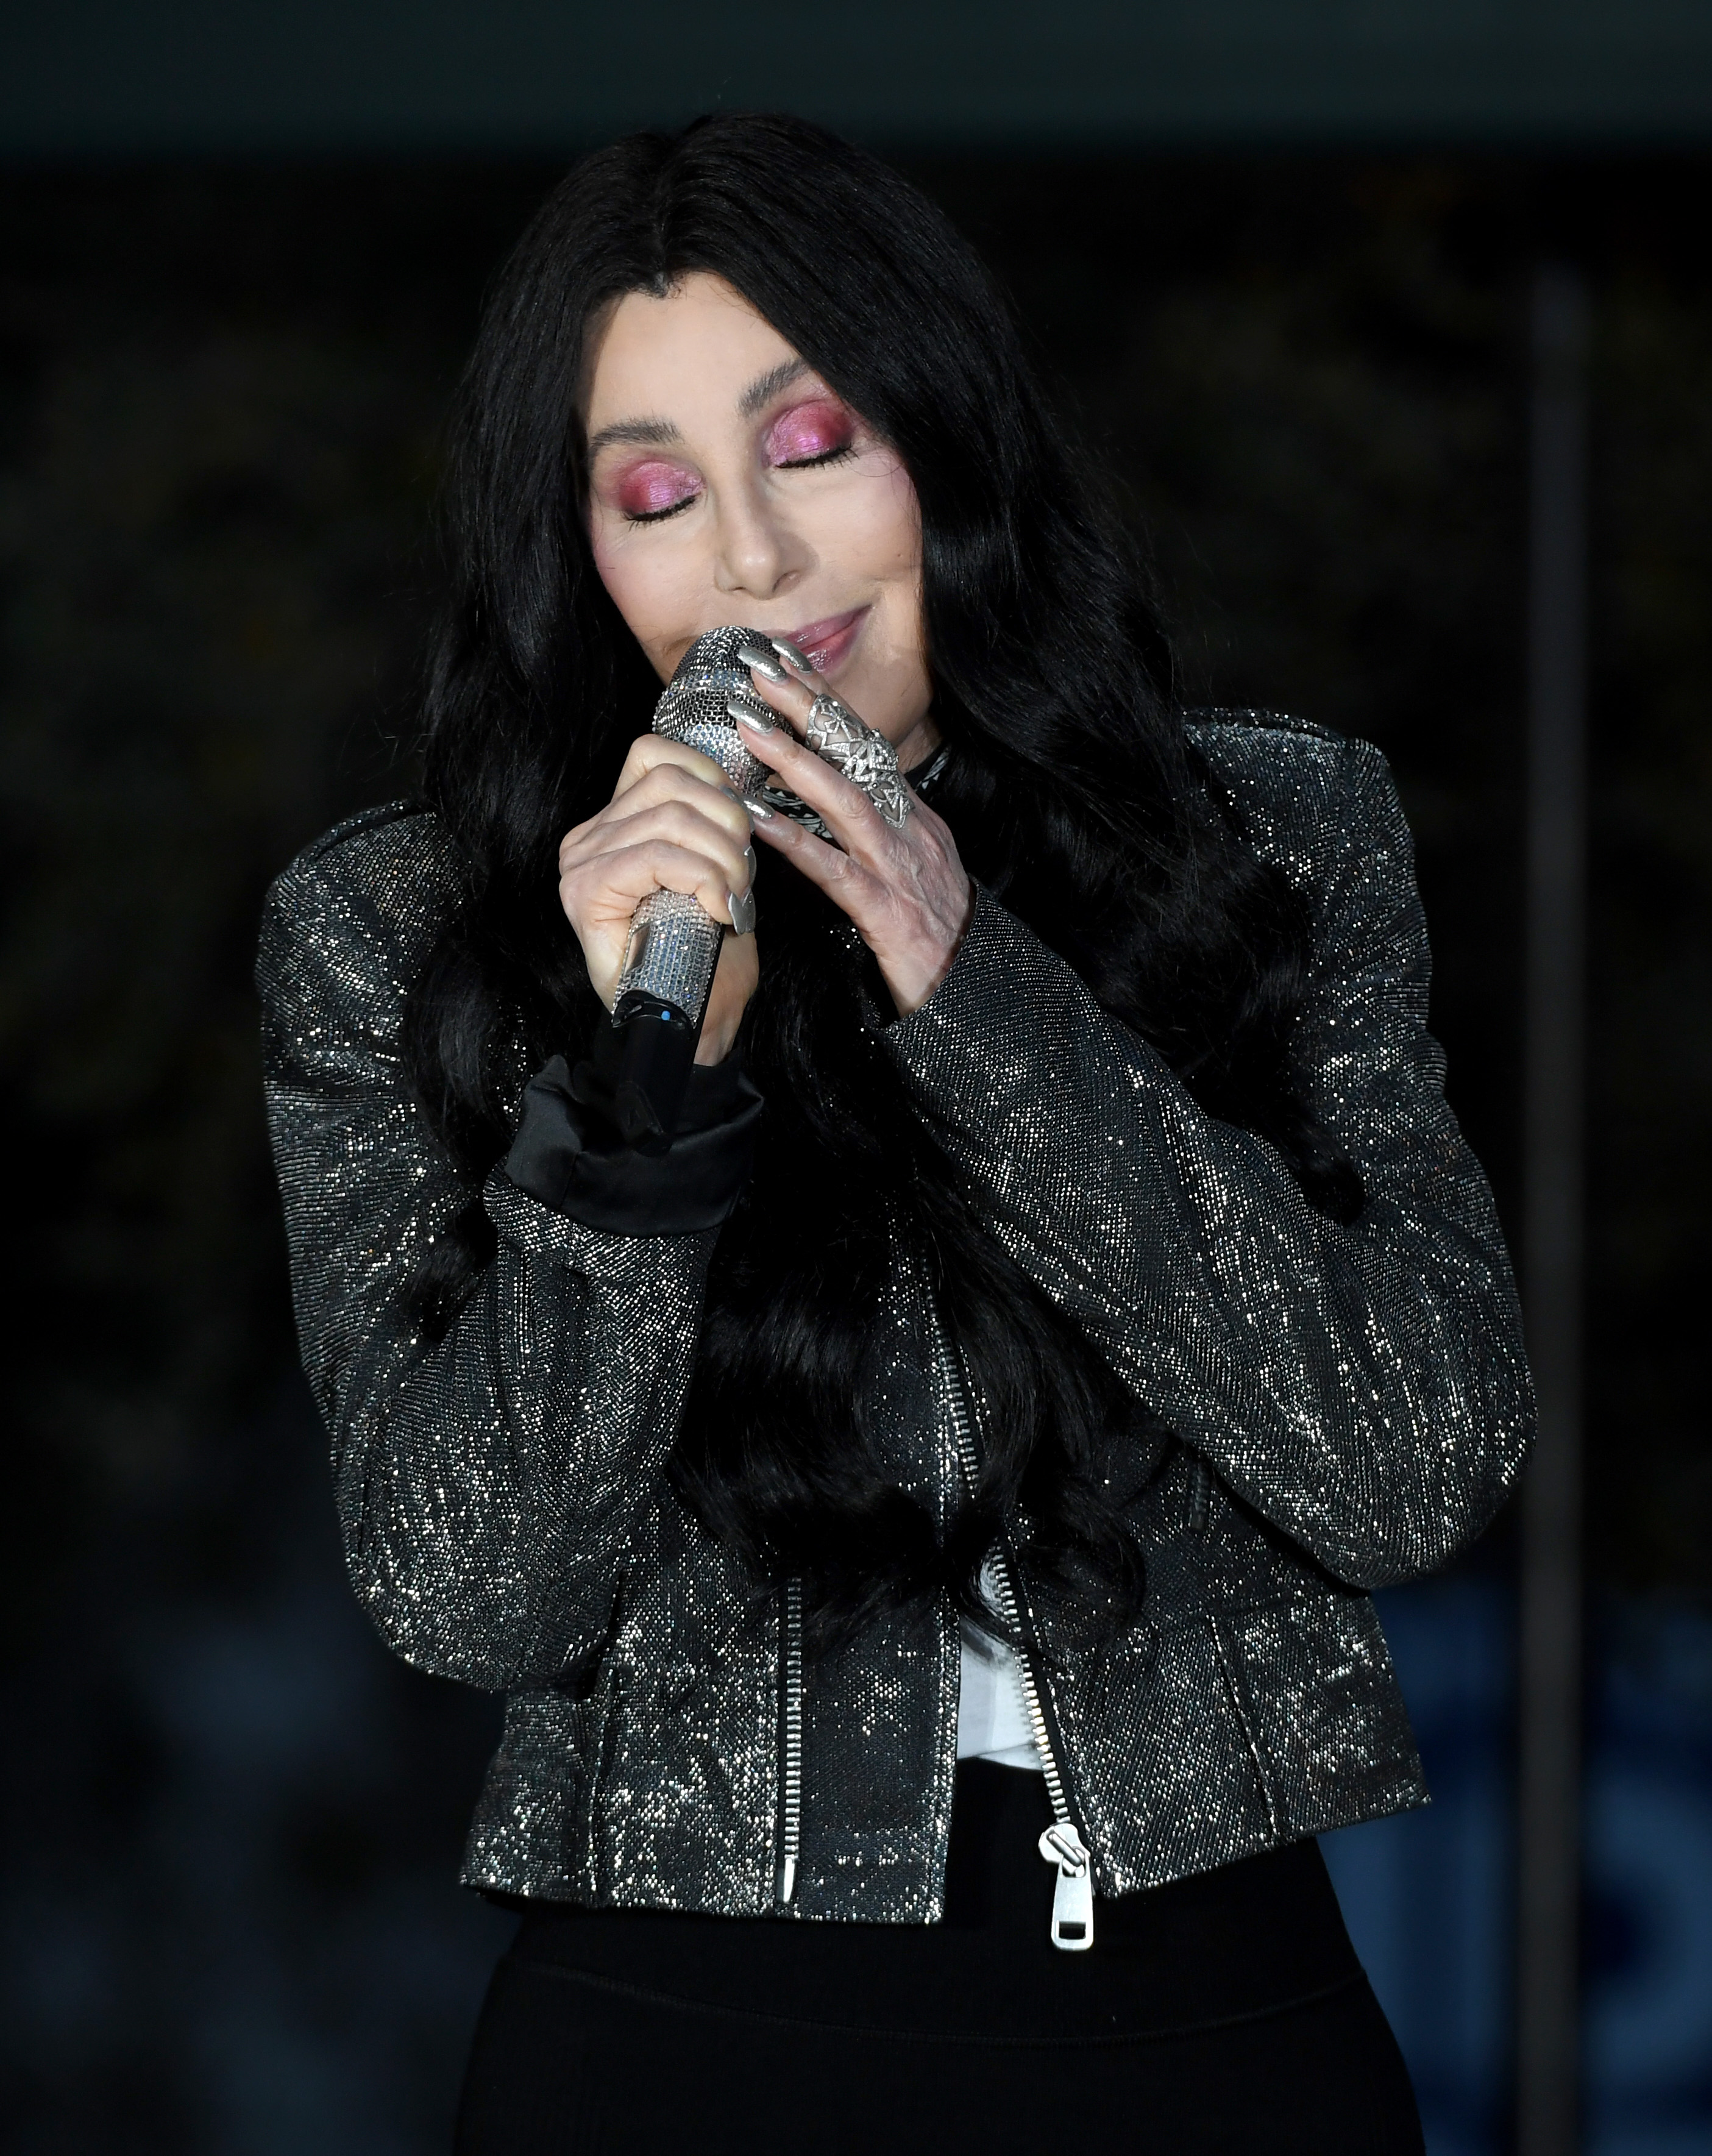 Cher performing on October 24, 2020 in Las Vegas, Nevada | Source: Getty Images